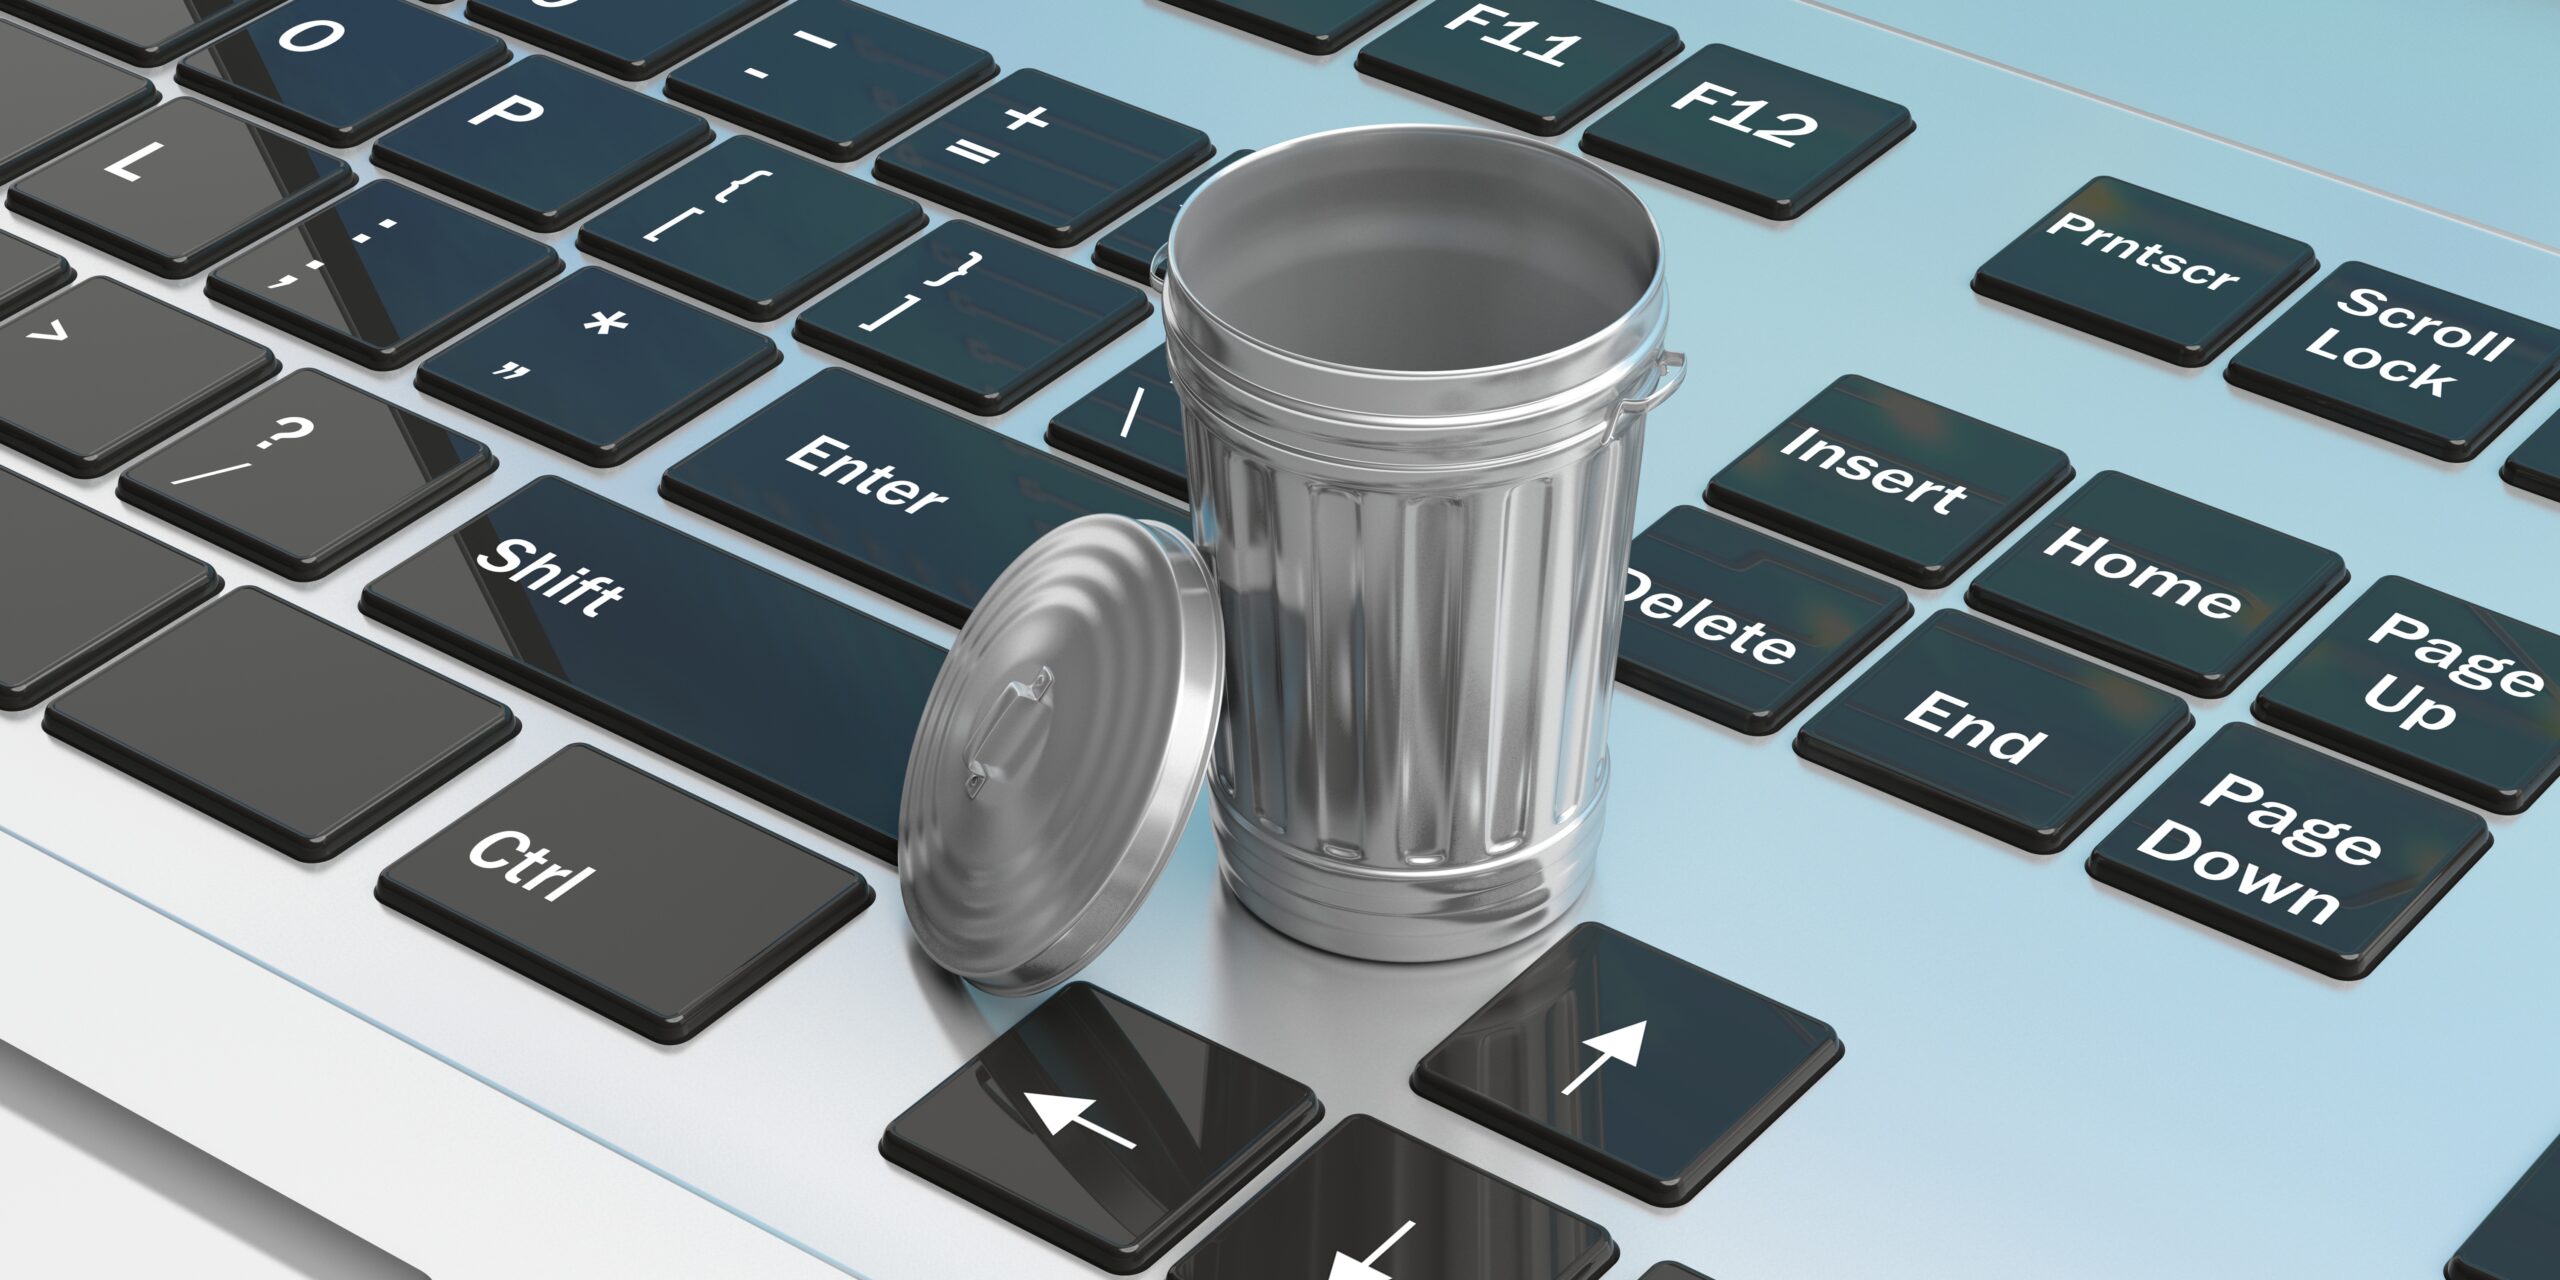 A silver trash can with its lid off is placed on a computer keyboard. The trash can is sitting on the "Shift" key, and the lid is on the "Ctrl" key. Other keys like "Enter," "Delete," and arrow keys are also visible surrounding the trash can.